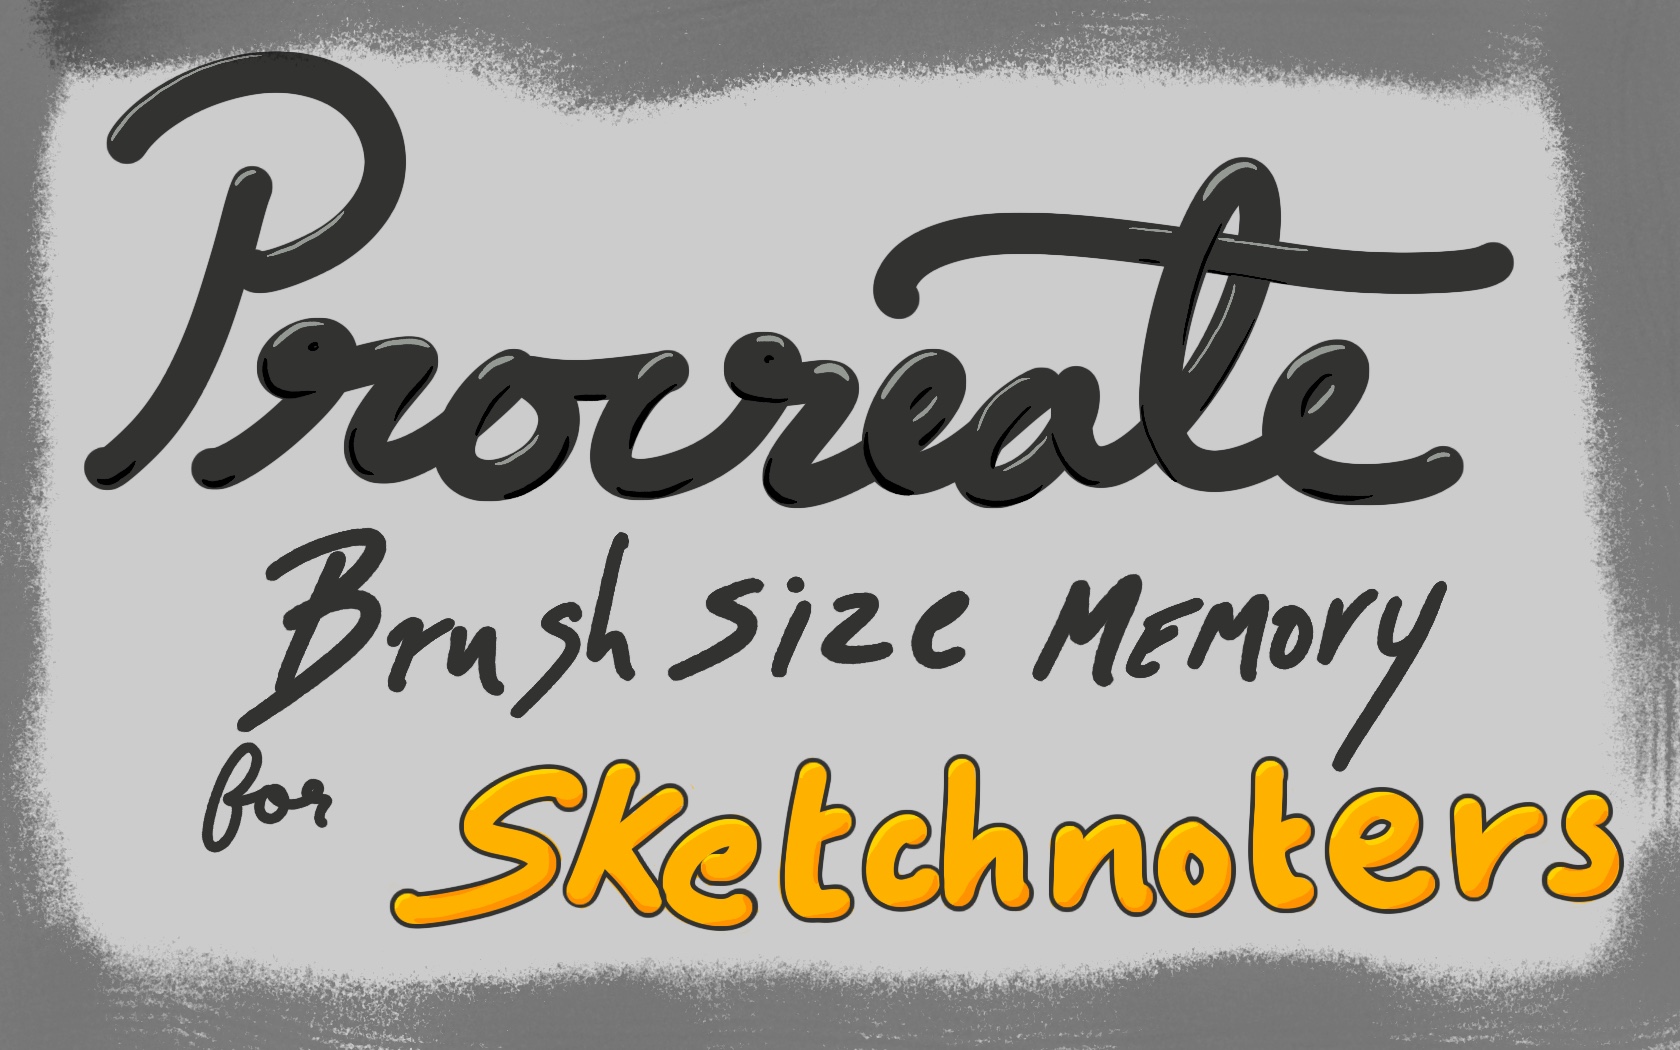 Why Procreate Brush Size Memory is perfect for sketchnoters